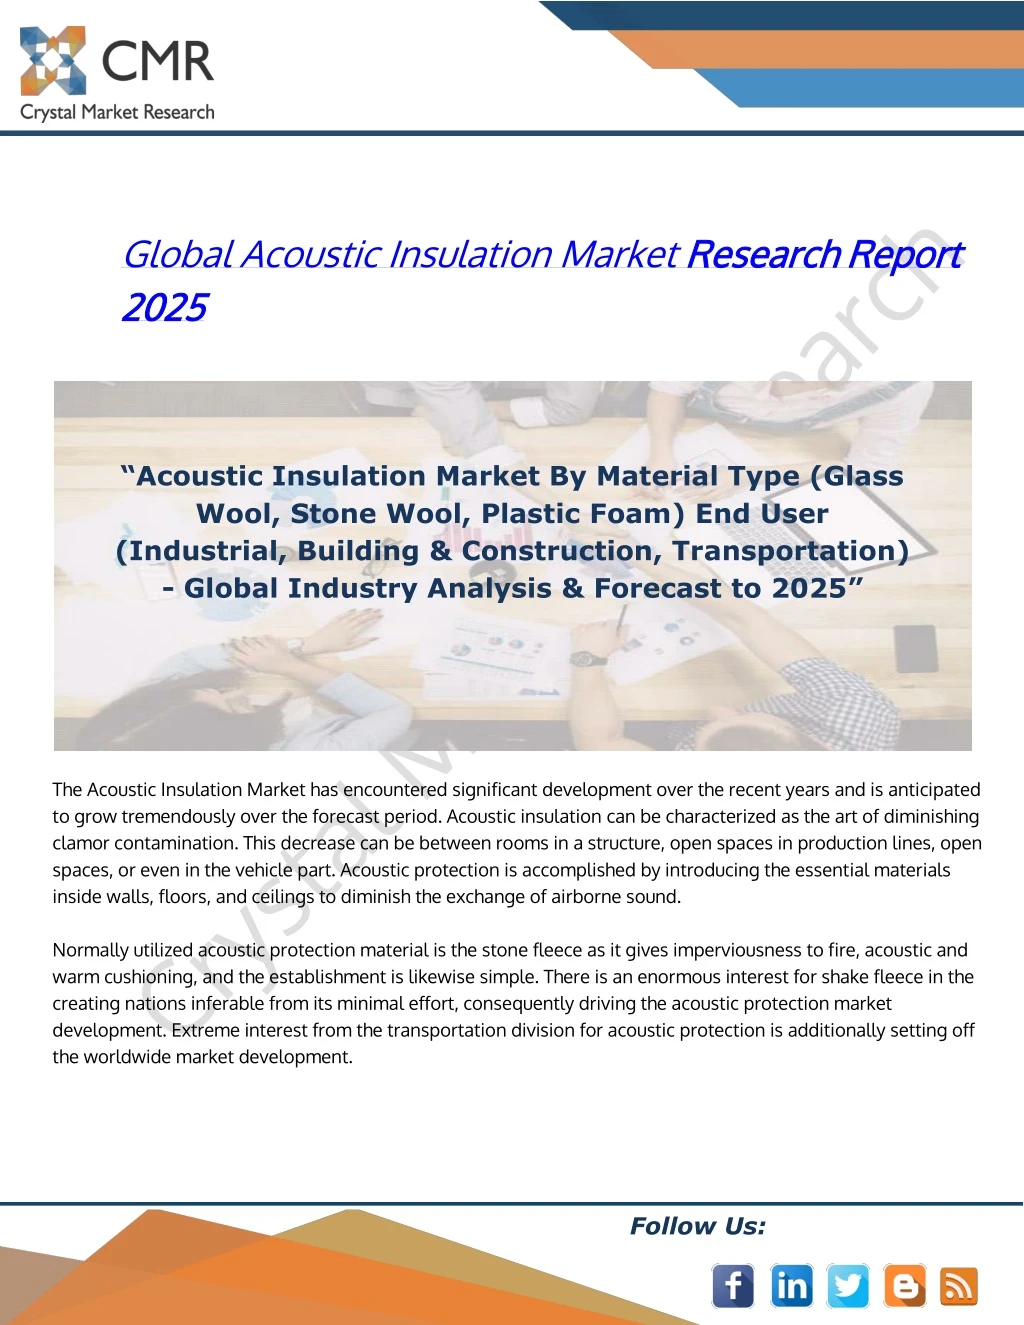 global acoustic insulation market research 2025